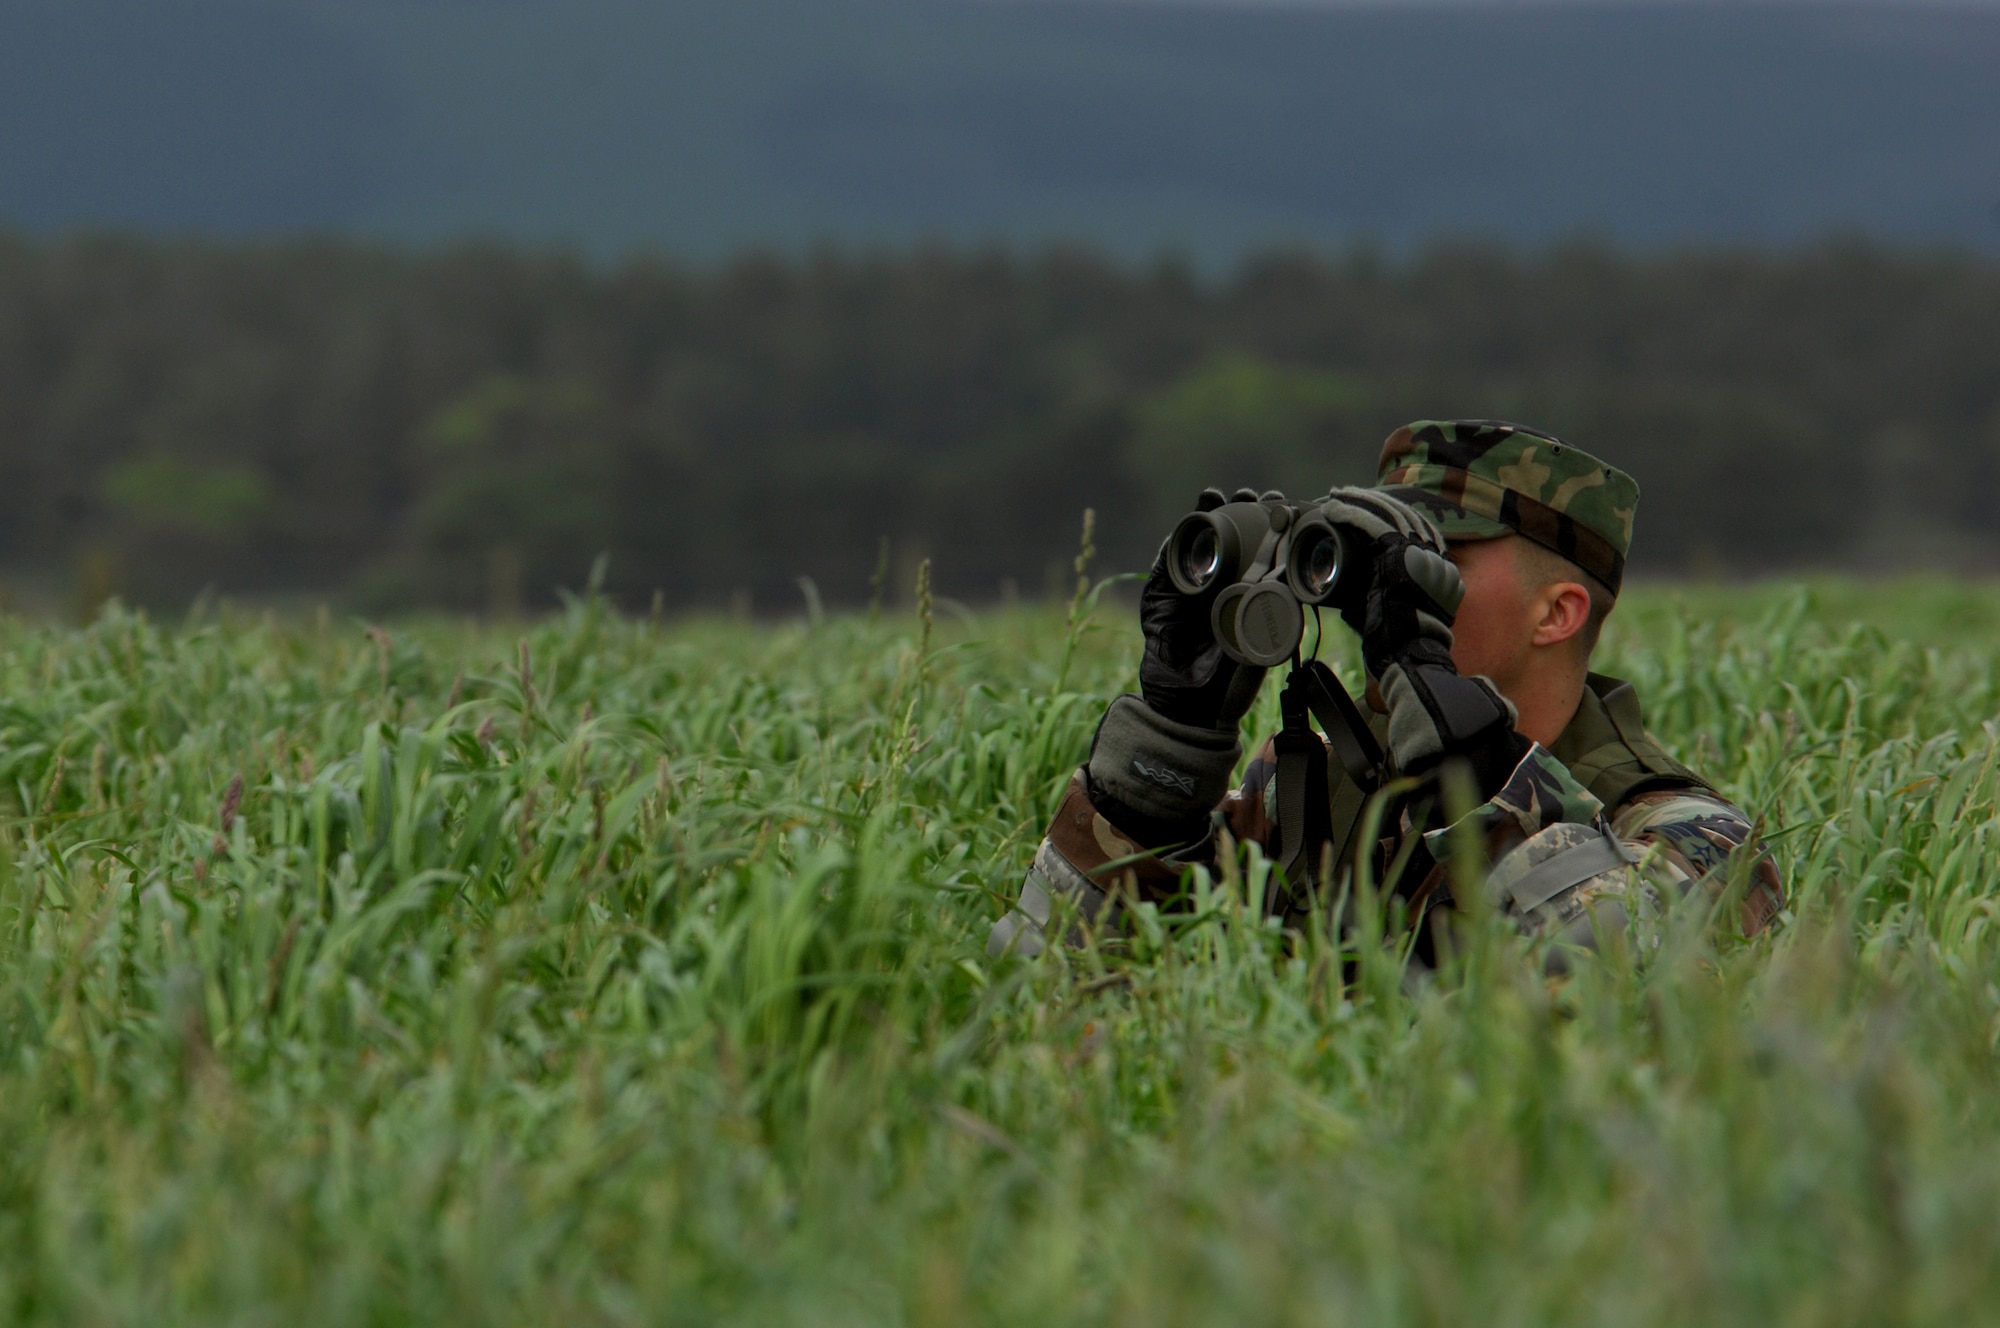 United States Air Force Senior Airman Nick Hurst, 786th Security Forces Squadron patrolman, peers across an airfield while waiting for the rest of his team to arrive in order to perform an airfield assessment during an Operational Readiness Exercise, May 18, 2009, West Freugh Airfield, Scotland. (U.S. Air Force photo by Senior Airman Kenny Holston)